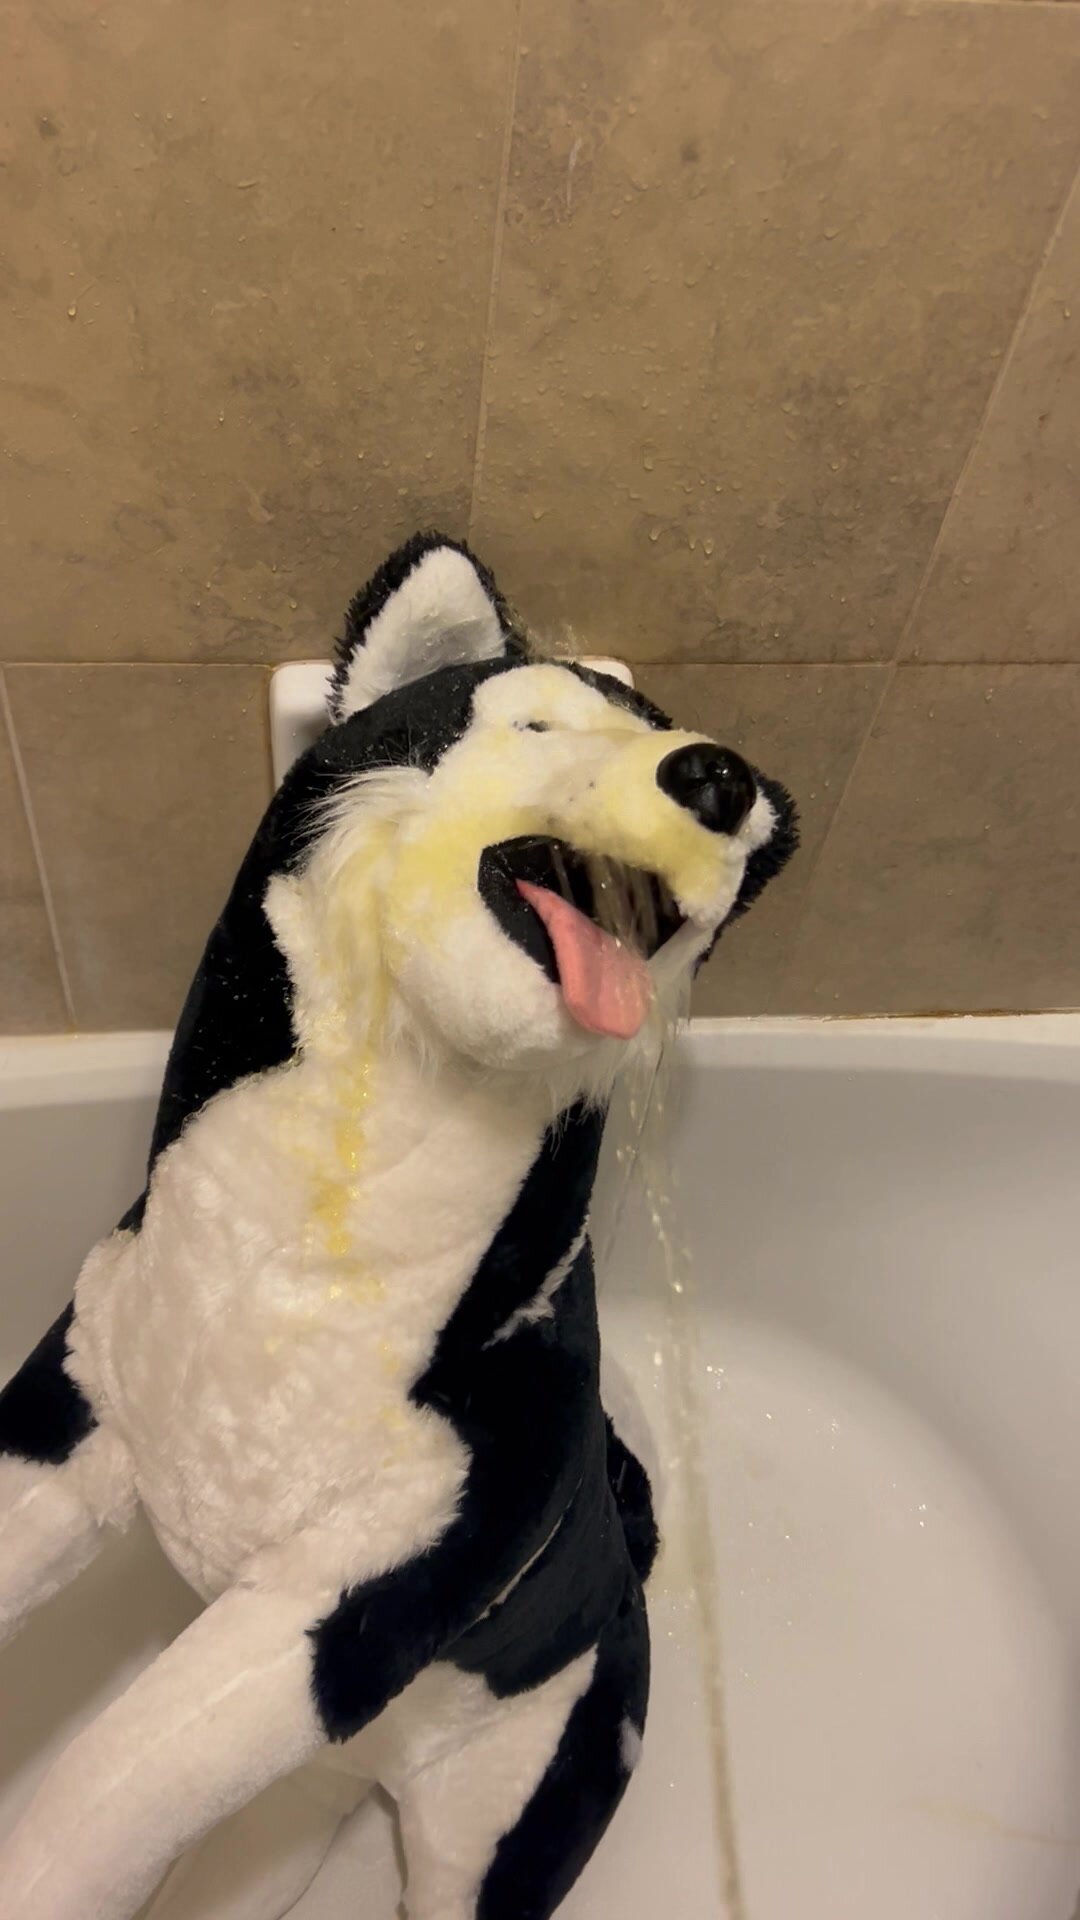 Pissing on a GIANT Husky Plush